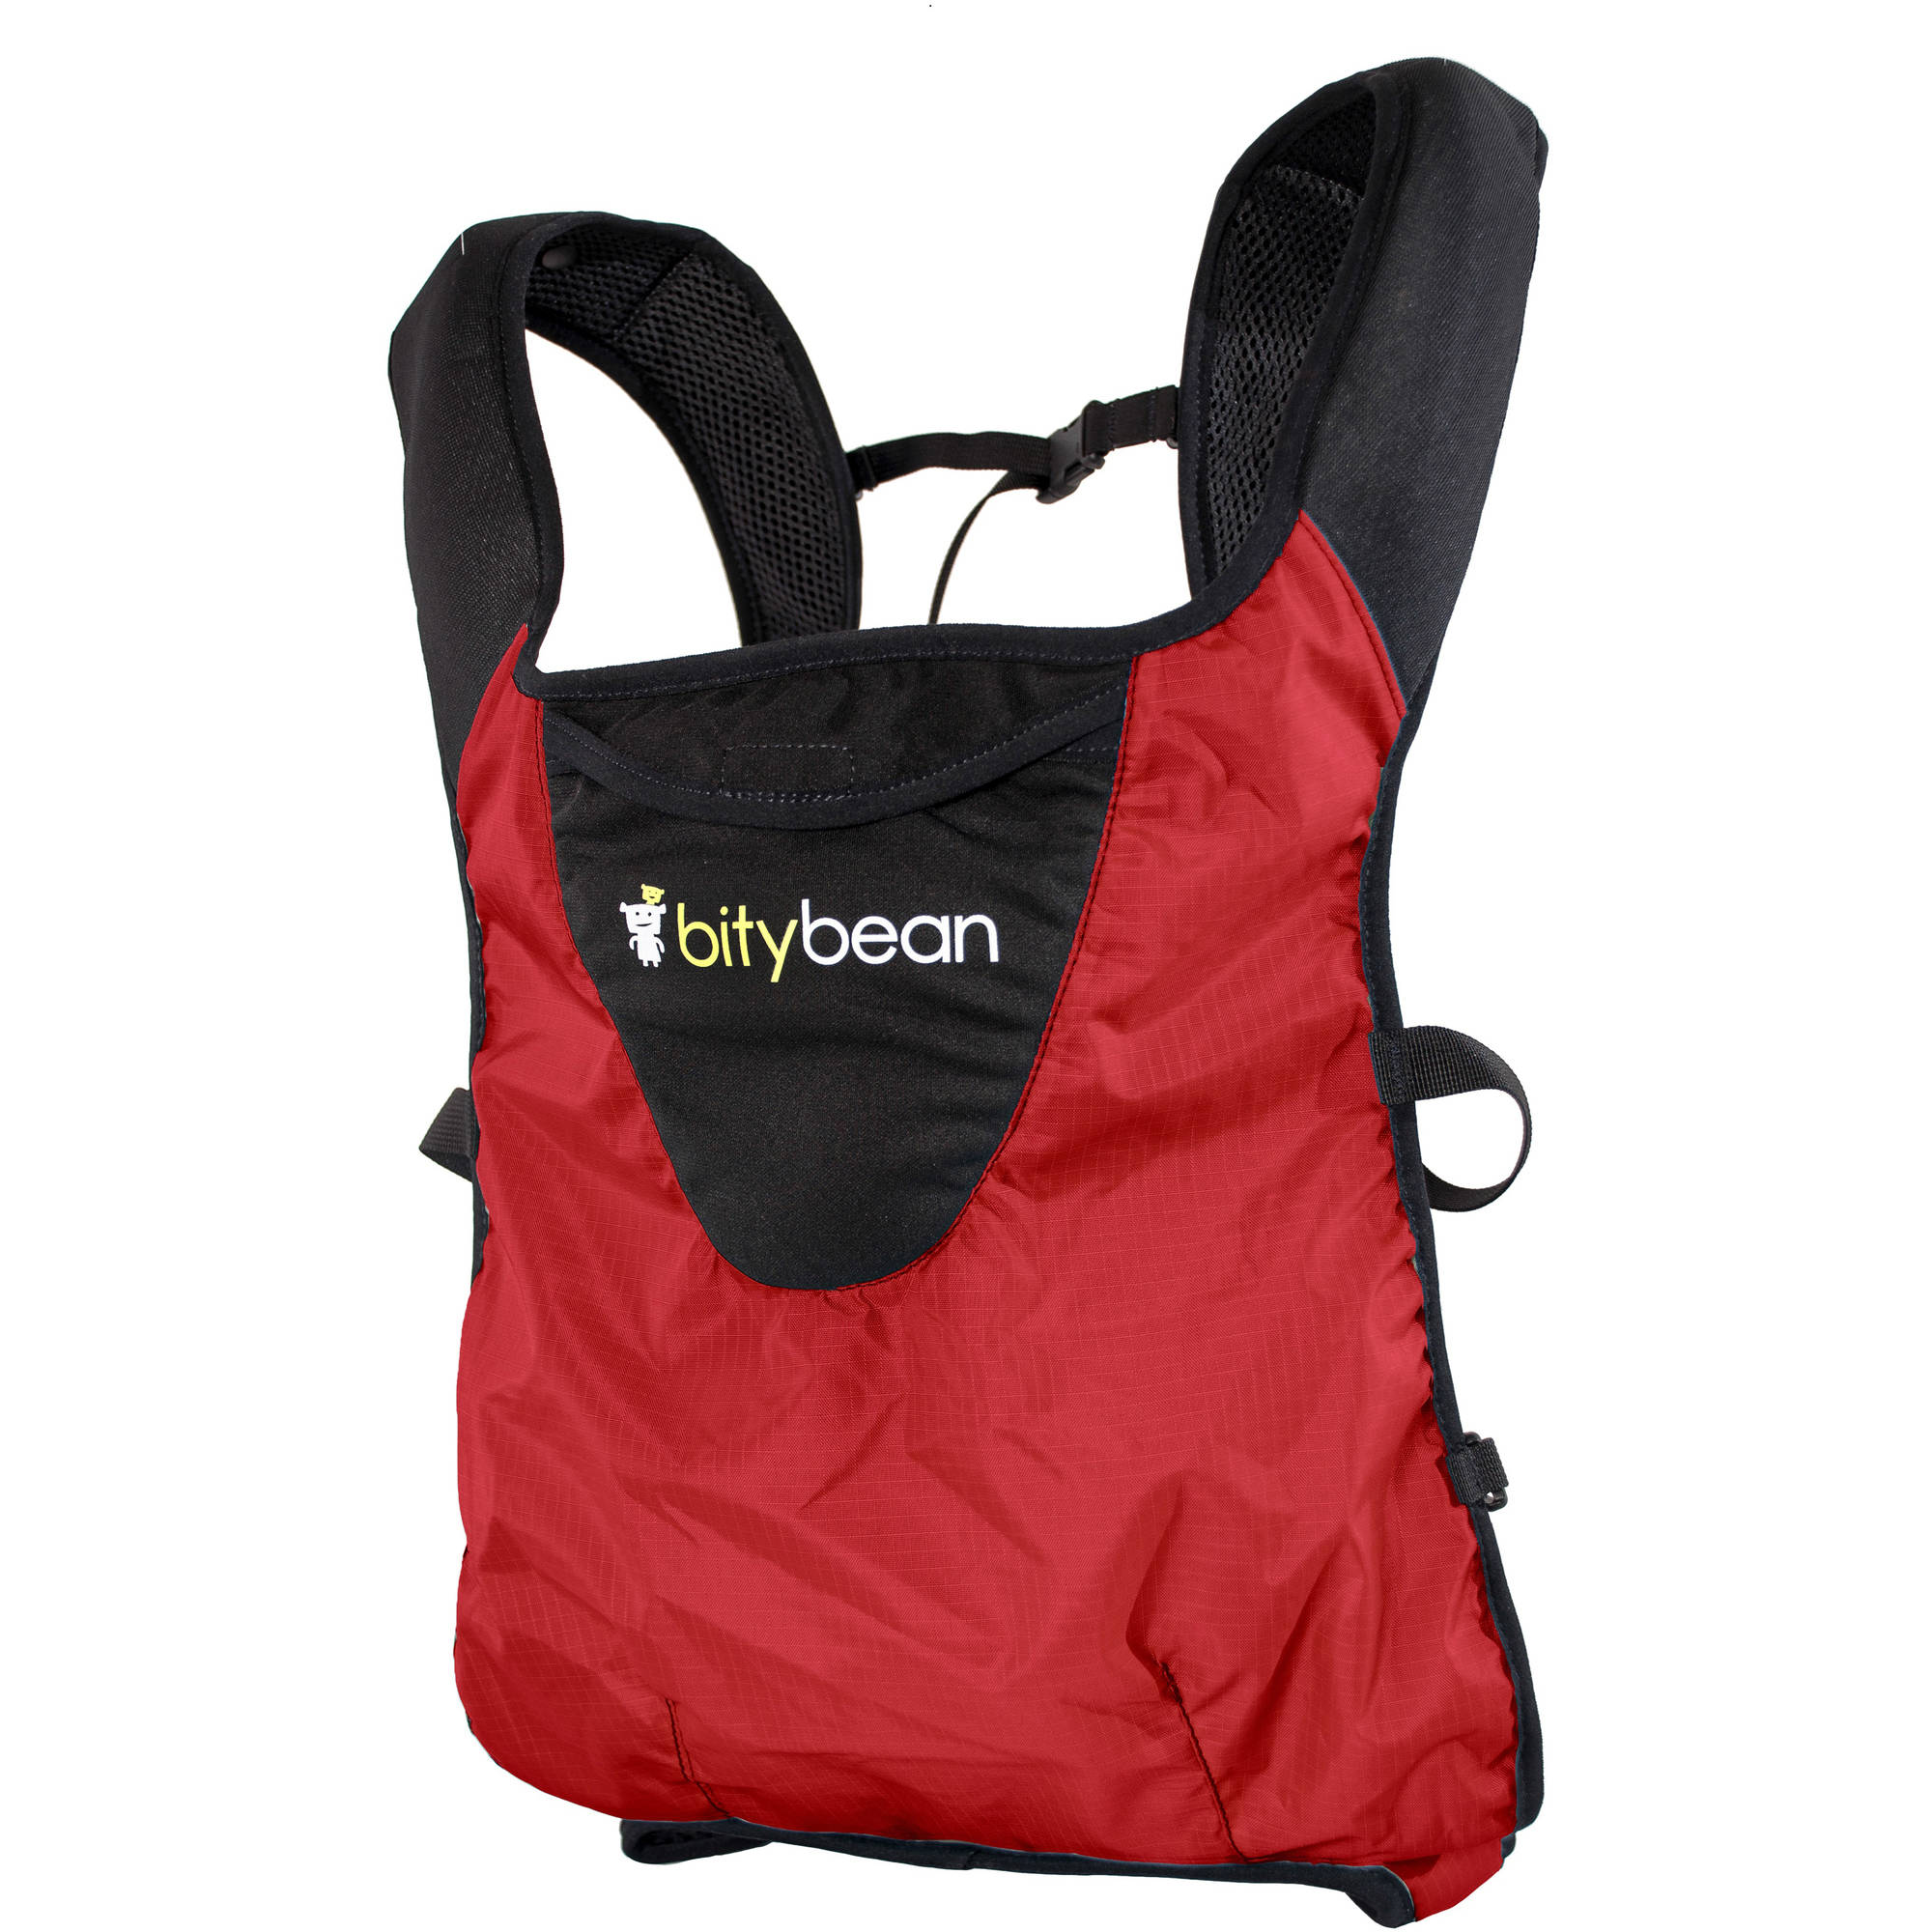 BityBean UltraCompact Baby Carrier, Tomato Red - image 2 of 4